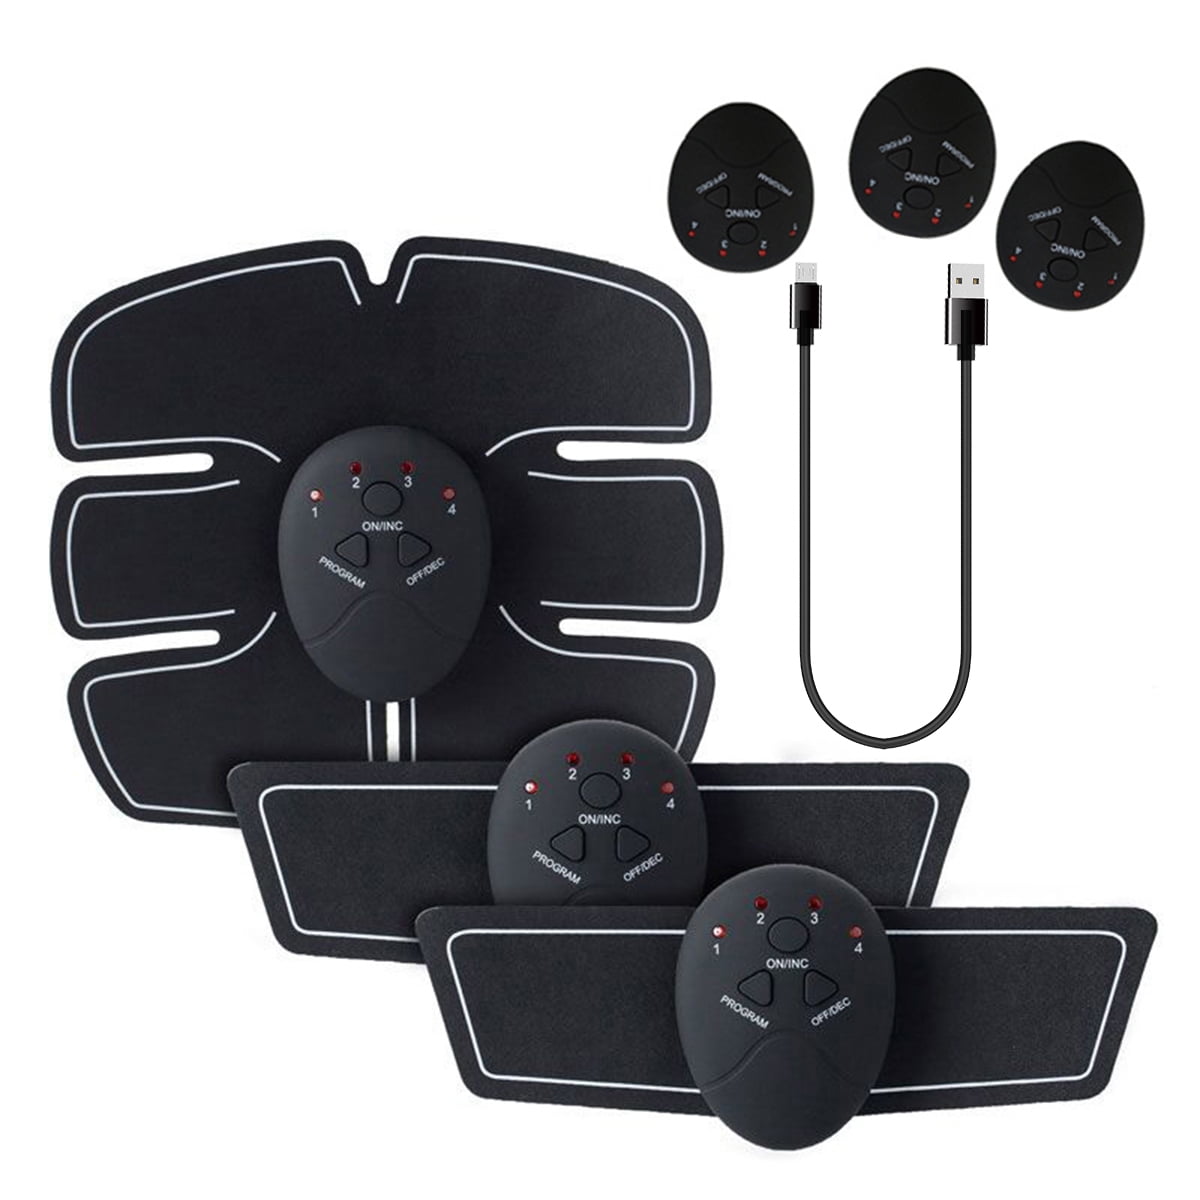 3 In 1 Rechargeable Abdominal Muscle Fitness Trainer EMS Body Stimulator Training Toner Kit,5pcs